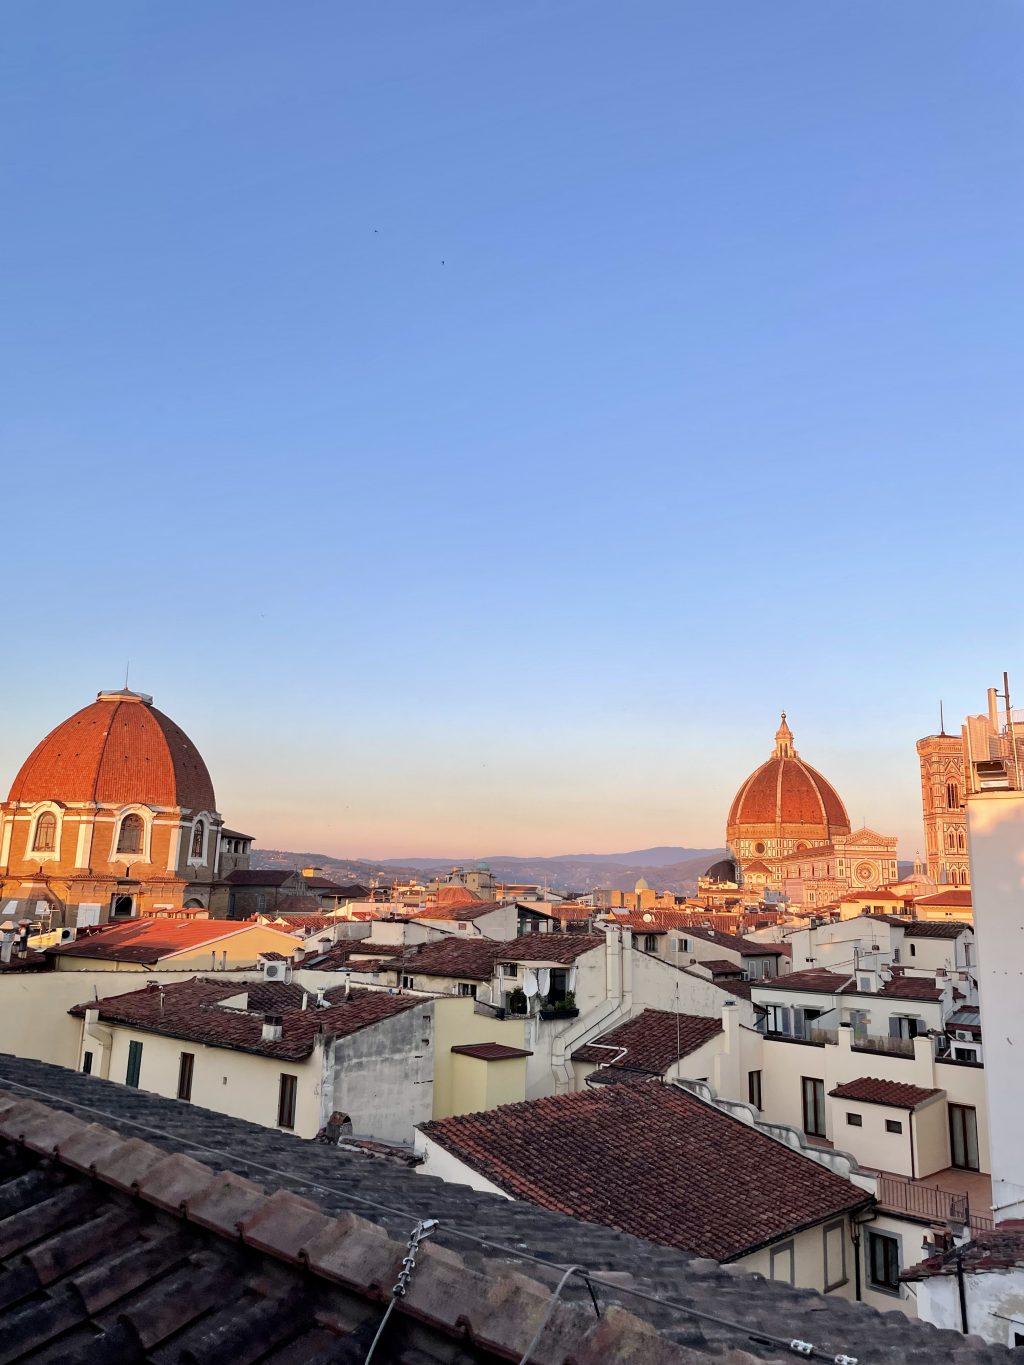 Our view of the city of Florence from the Hotel Baglioni at sunset. June 30. The Florence Program director arranged a final dinner celebration for the students to conclude their time spent abroad.